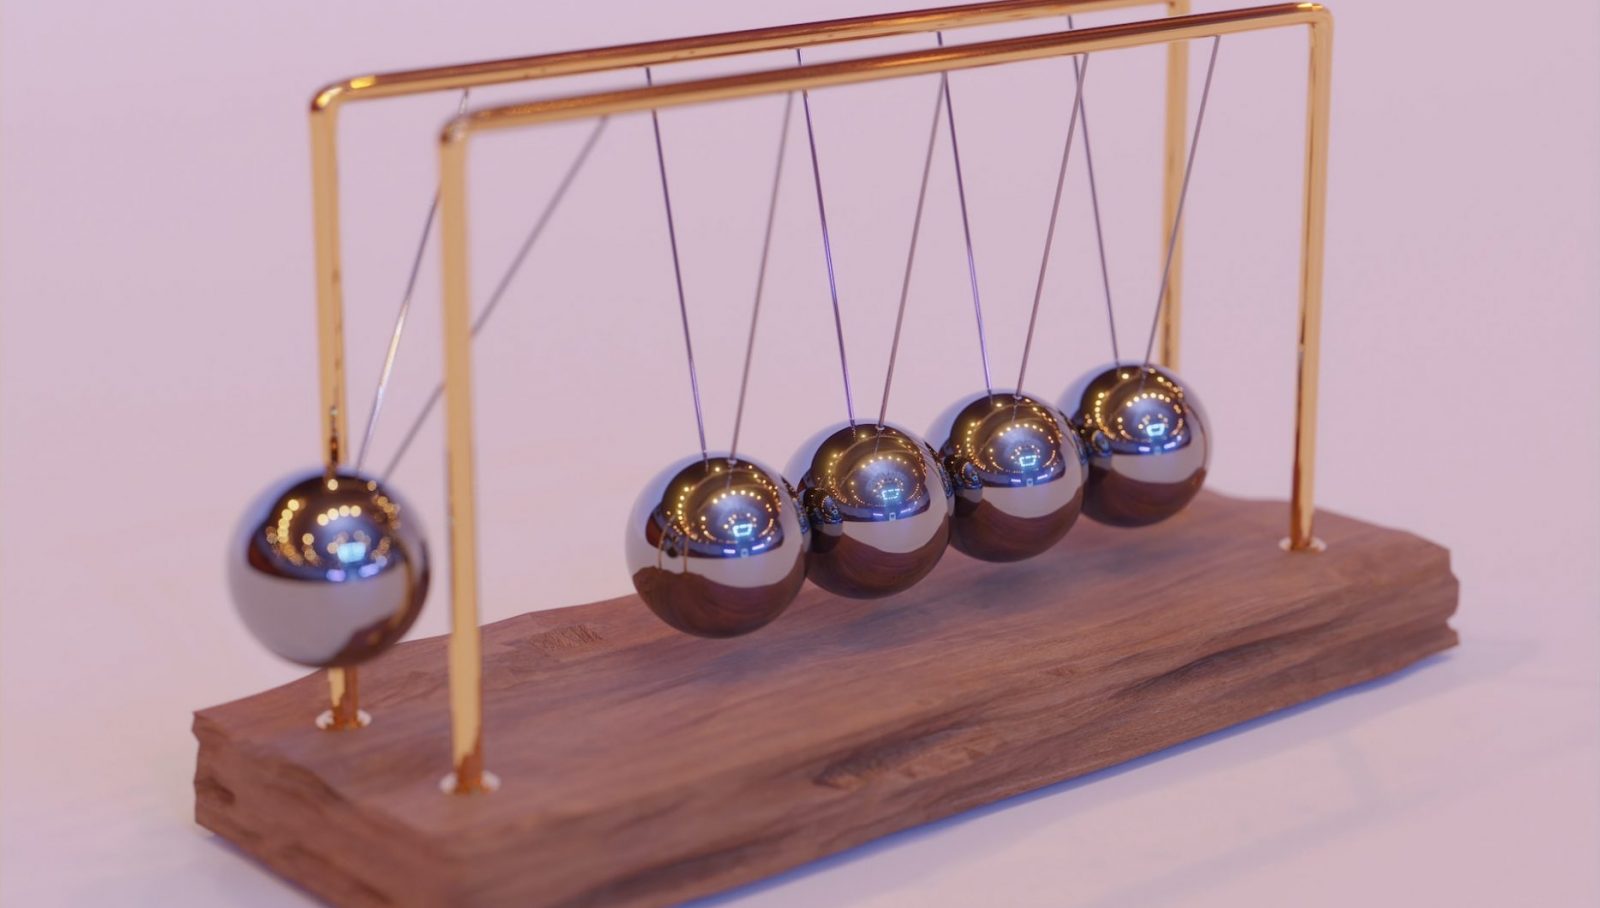 Wooden stand with metal balls hitting the others